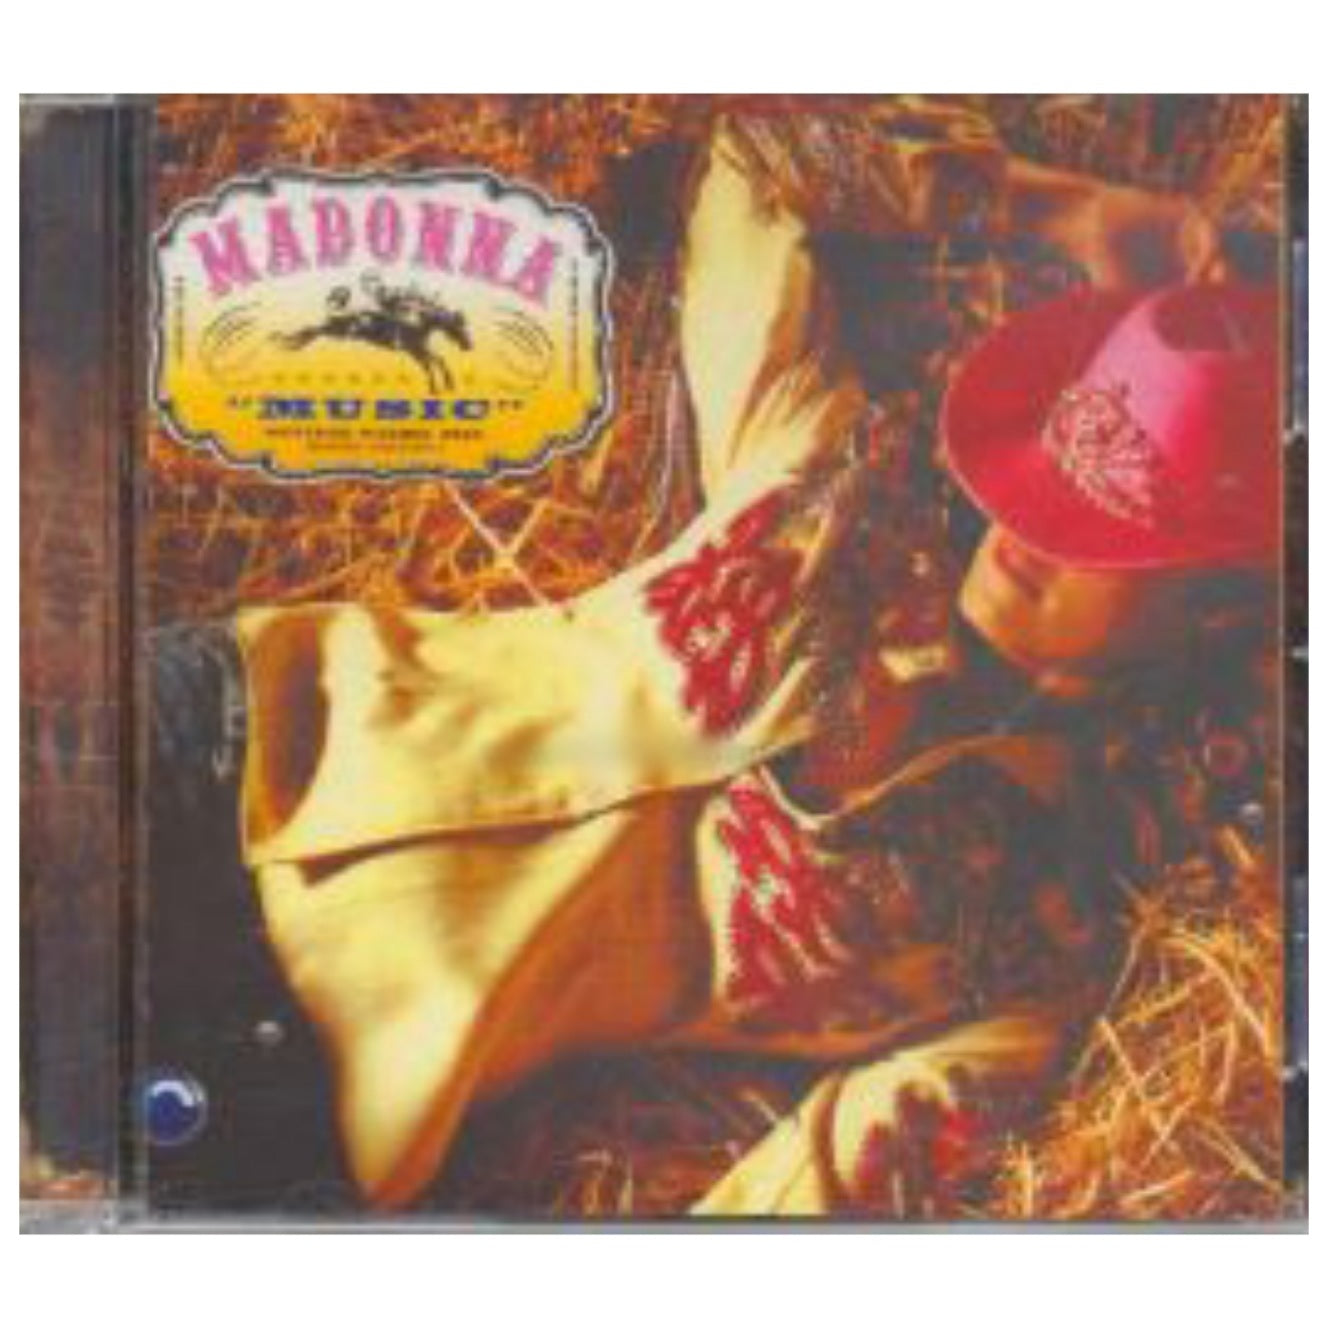 Madonna: Music - Chile CD Single - 3-track Limited Edition Chilean Import